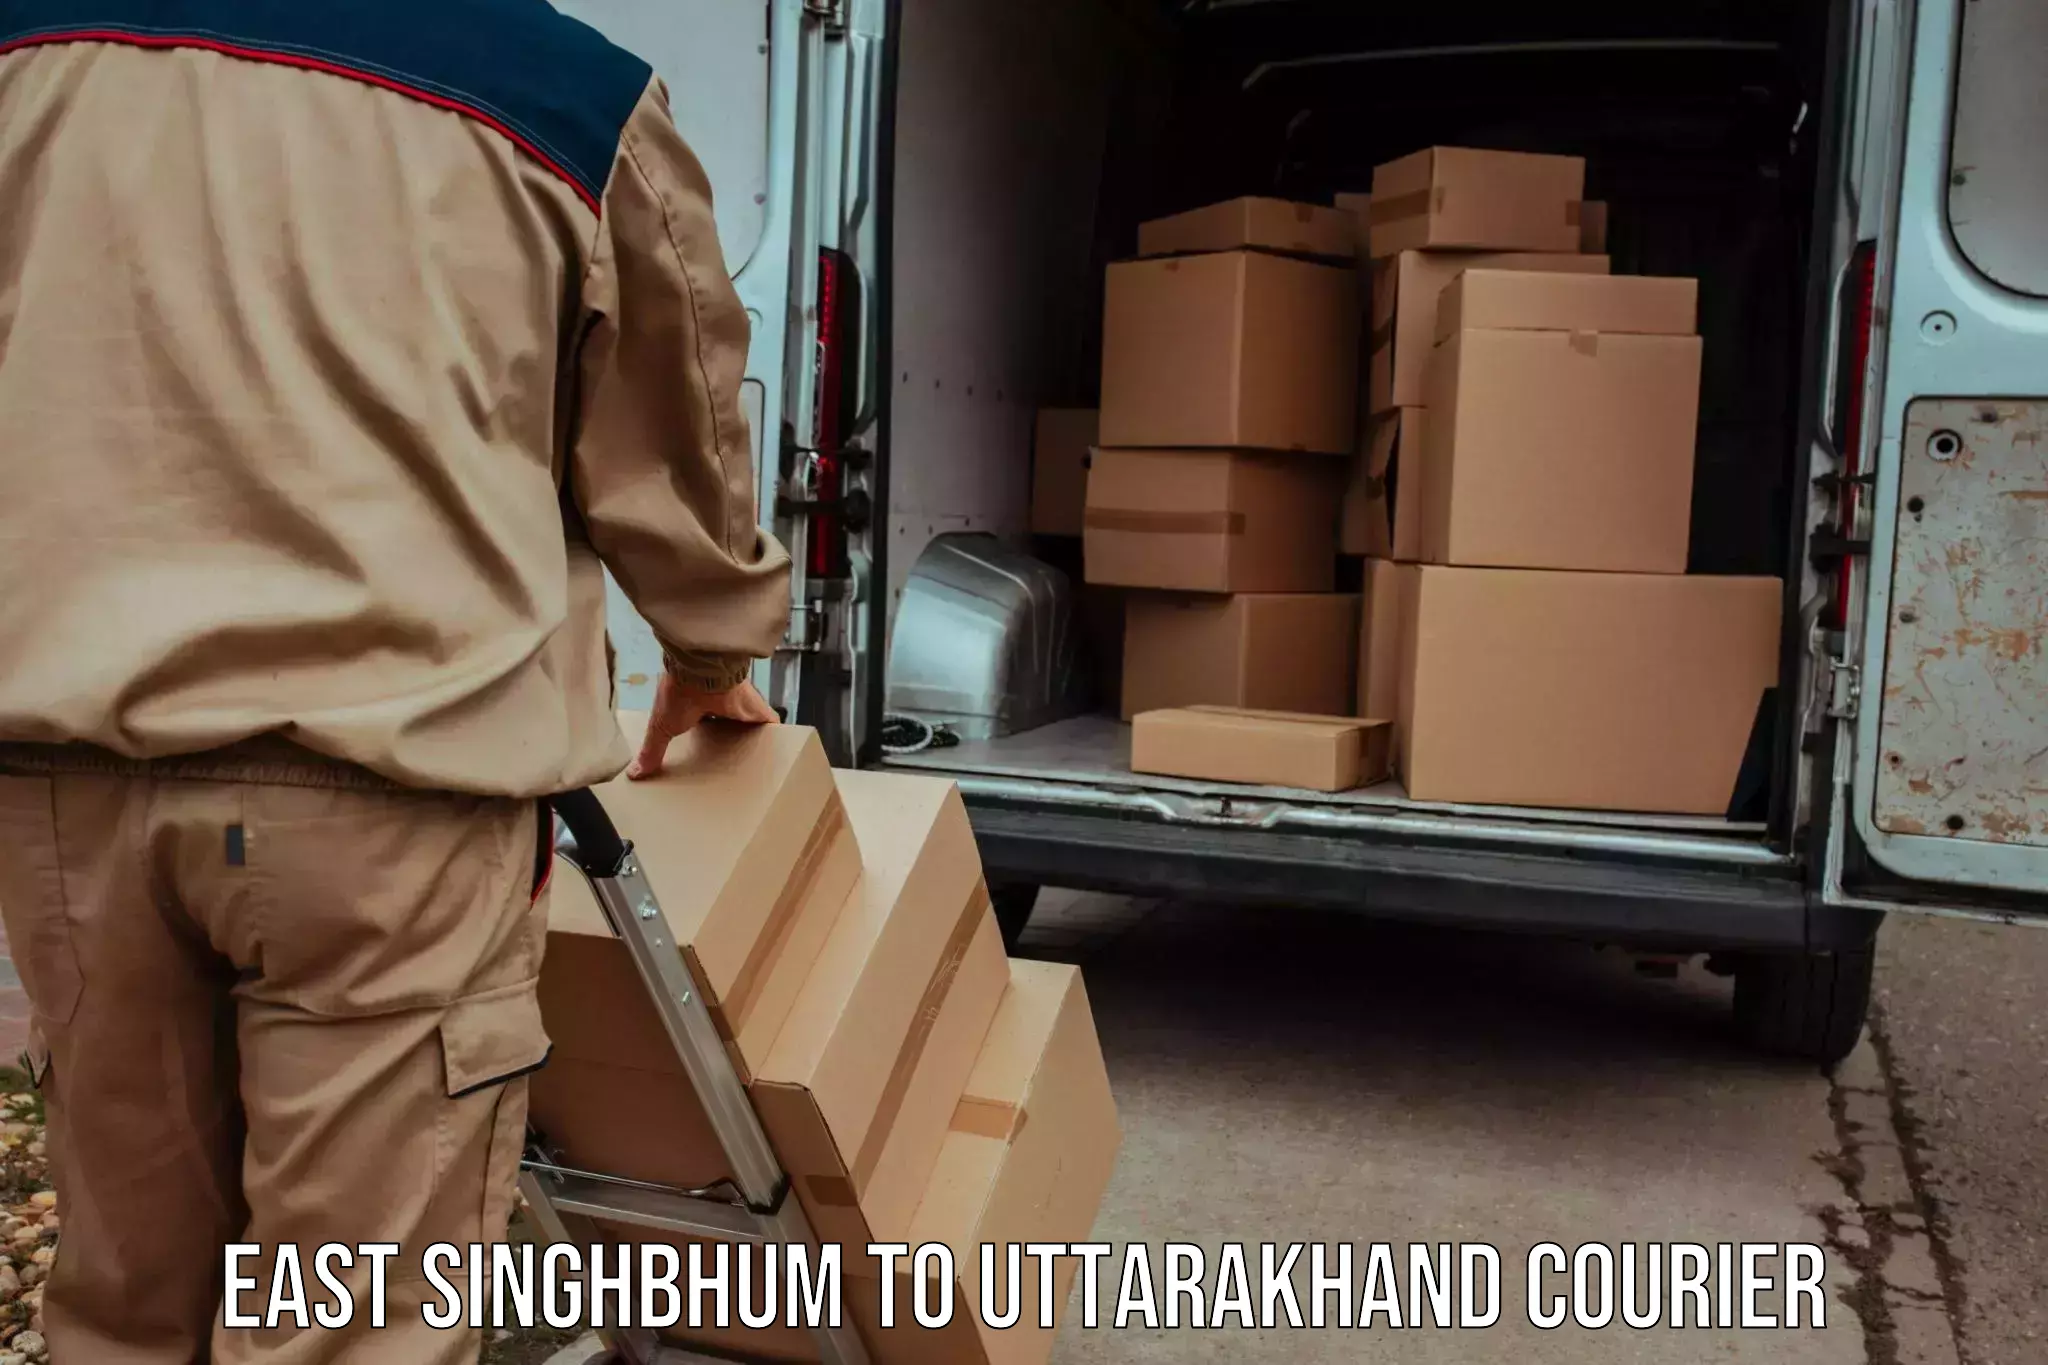 Speedy delivery service in East Singhbhum to Rudrapur